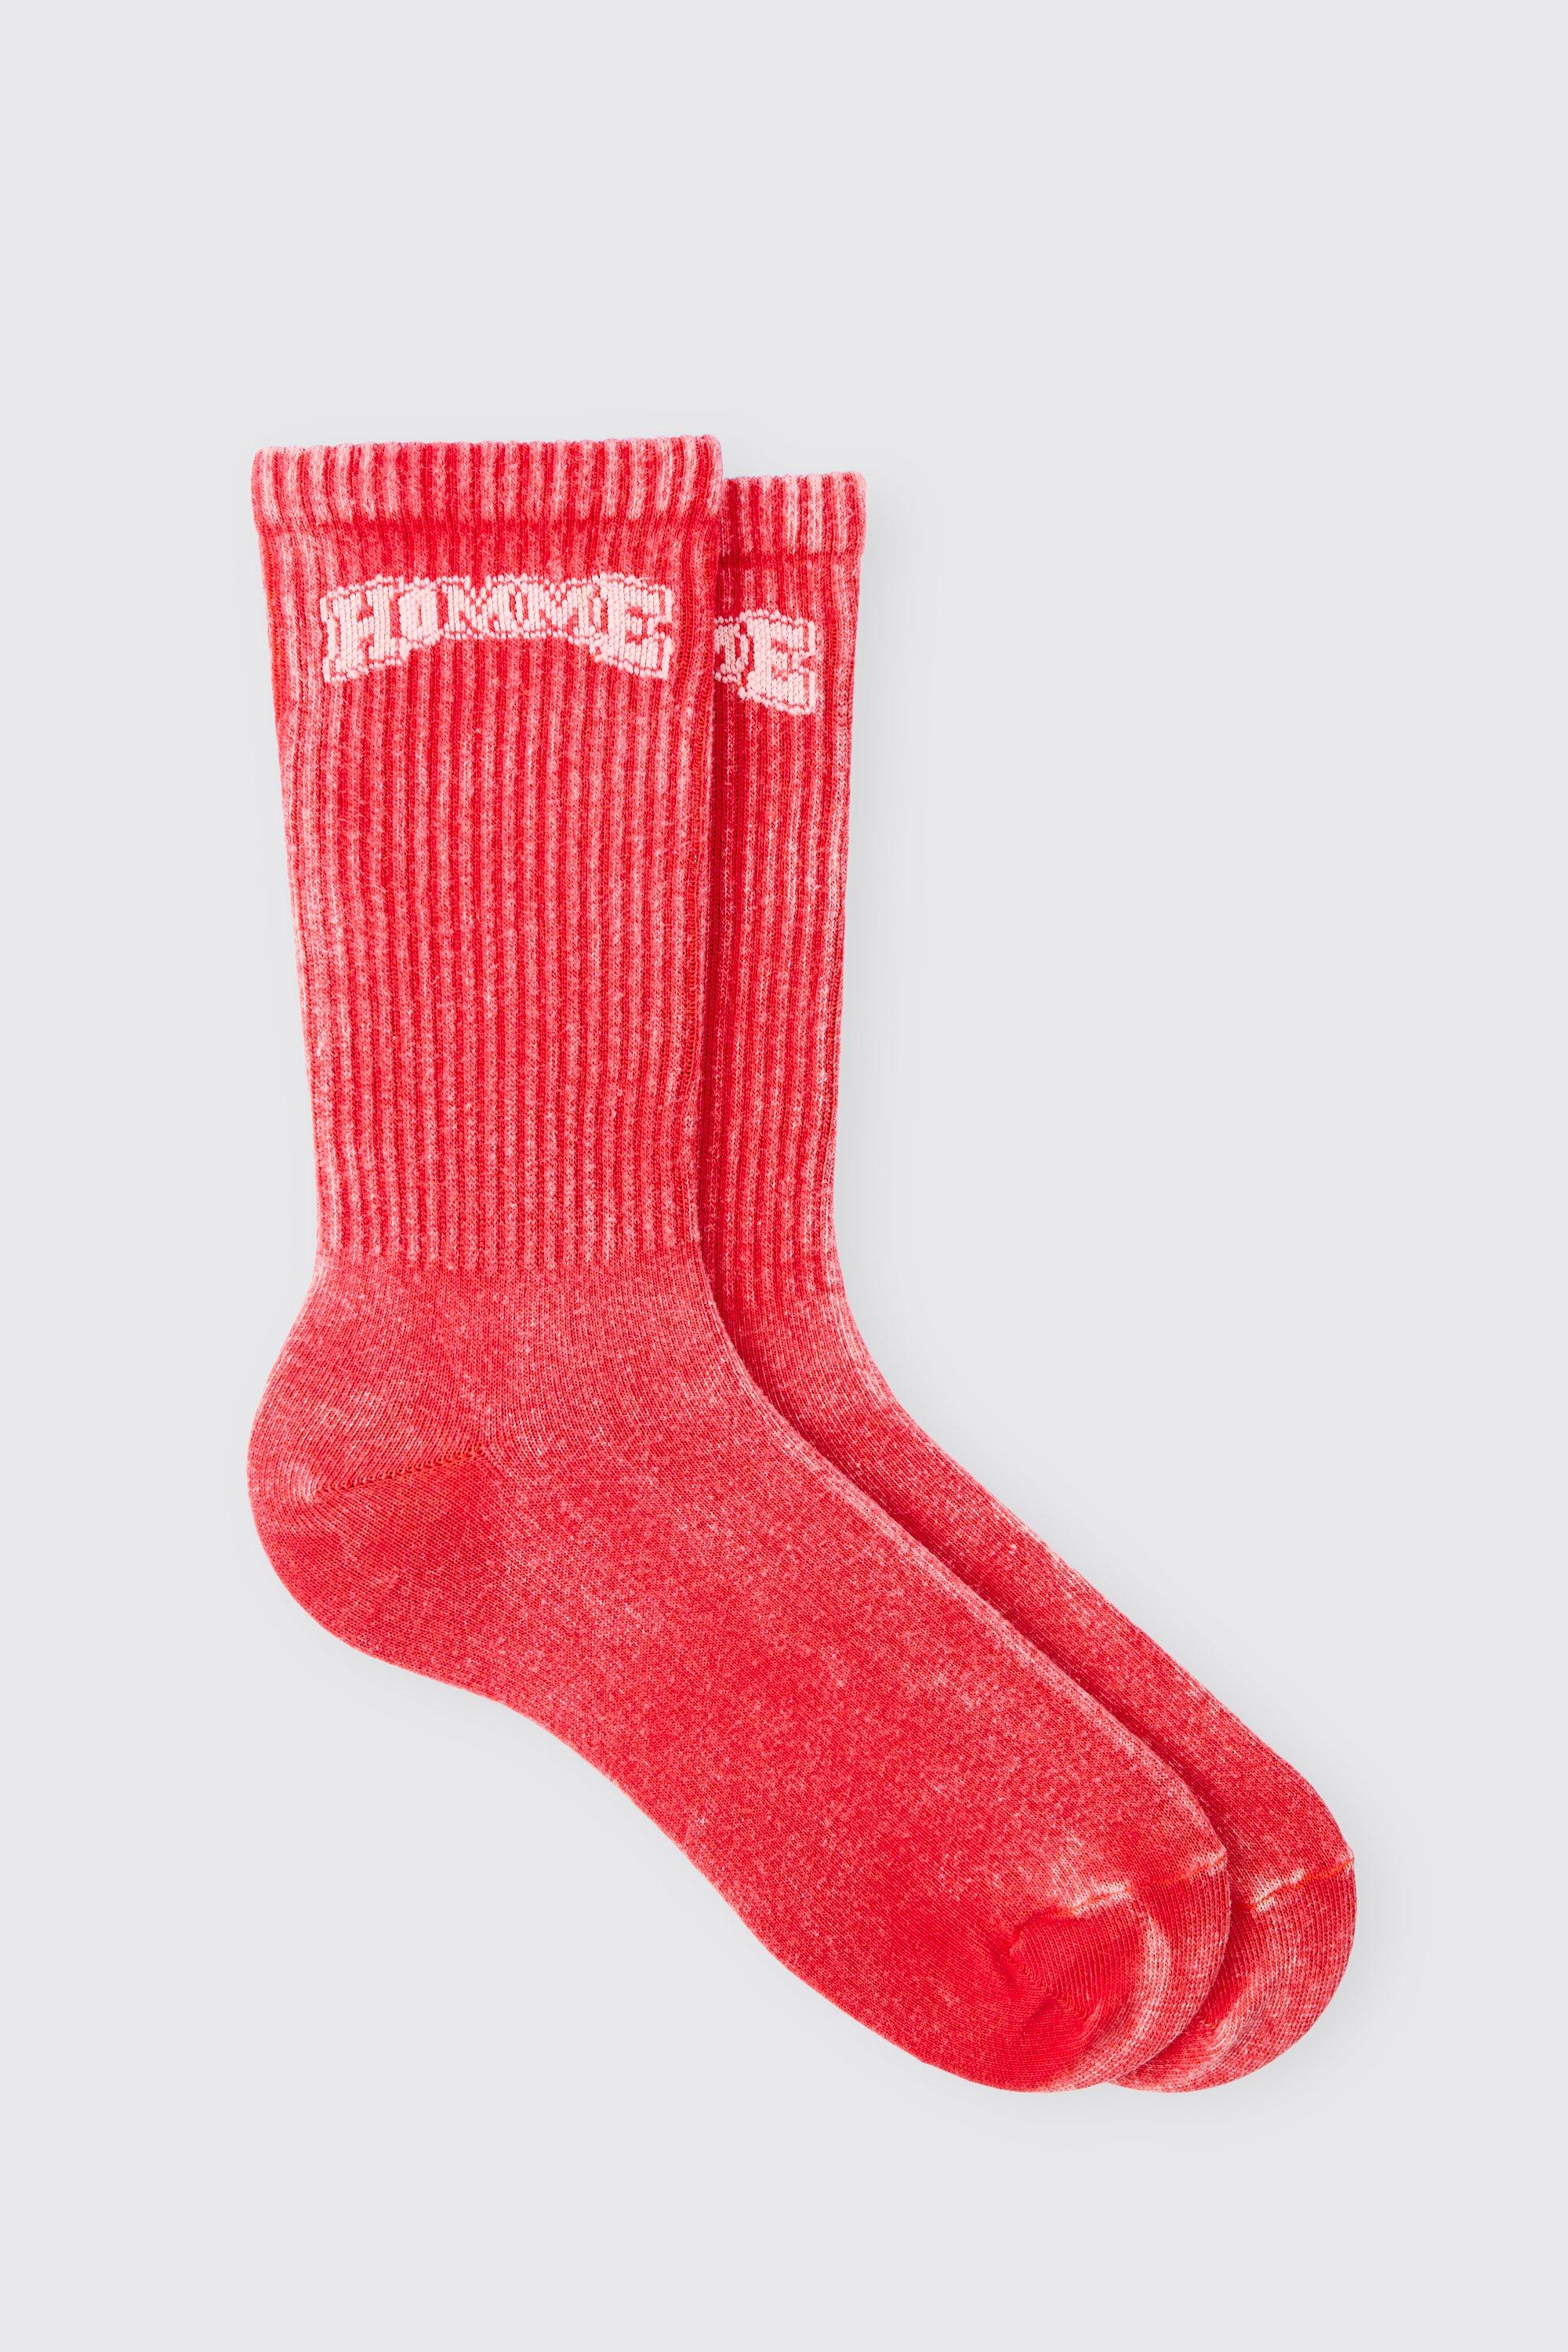 Image of Acid Wash Homme Socks In Red, Rosso